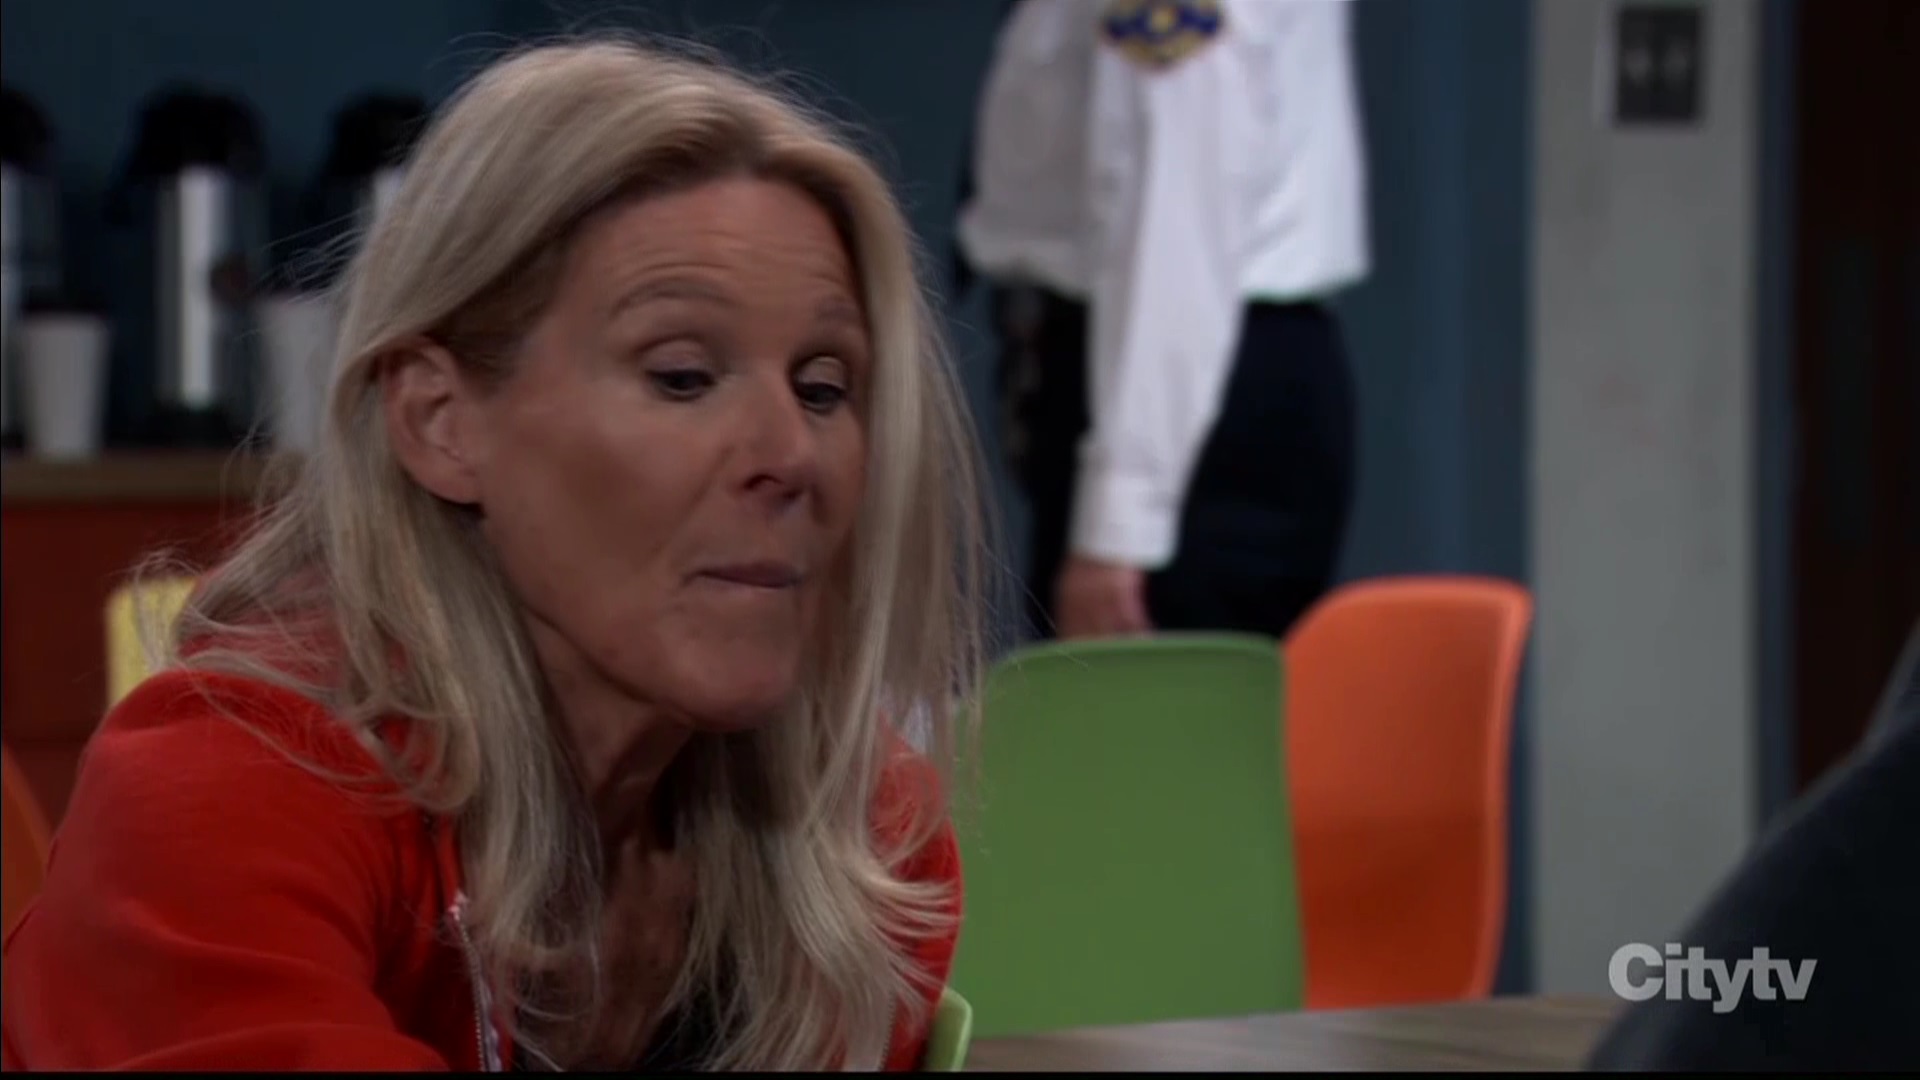 heather has a gift for ryan GH recaps SoapsSpoilers